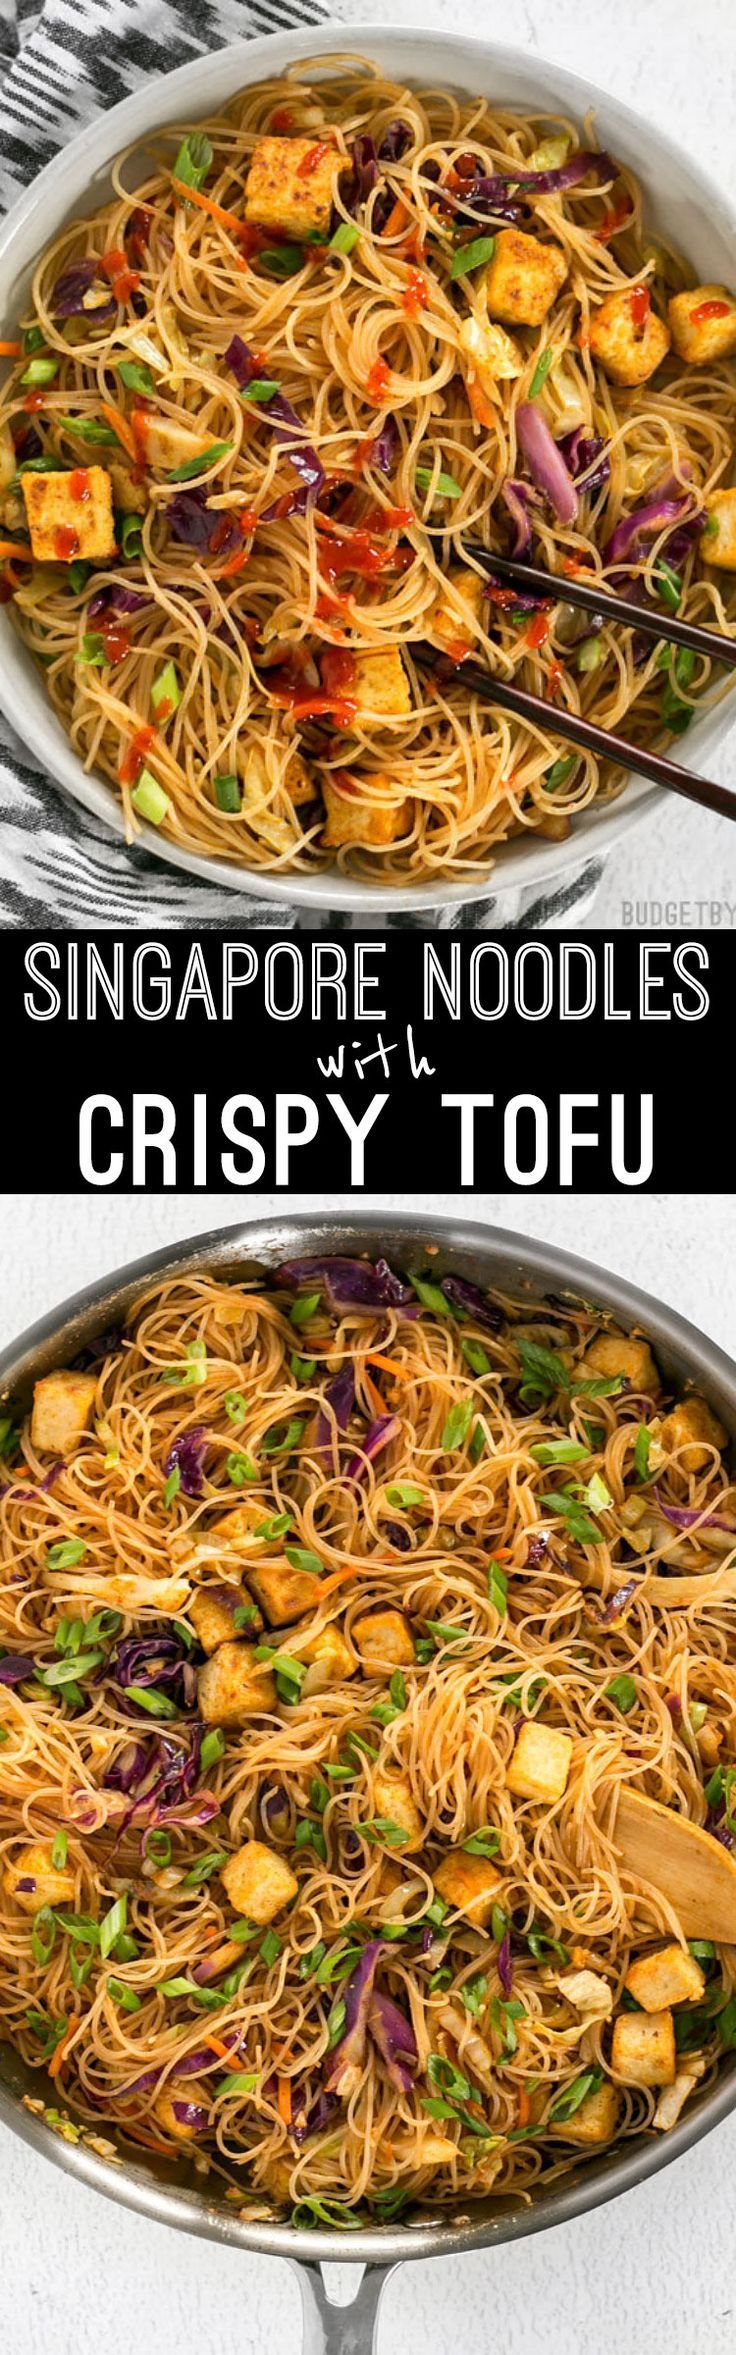 These Singapore Noodles with Crispy Tofu have a bold flavor and vibrant colors thanks to shredded vegetables and a bright curry